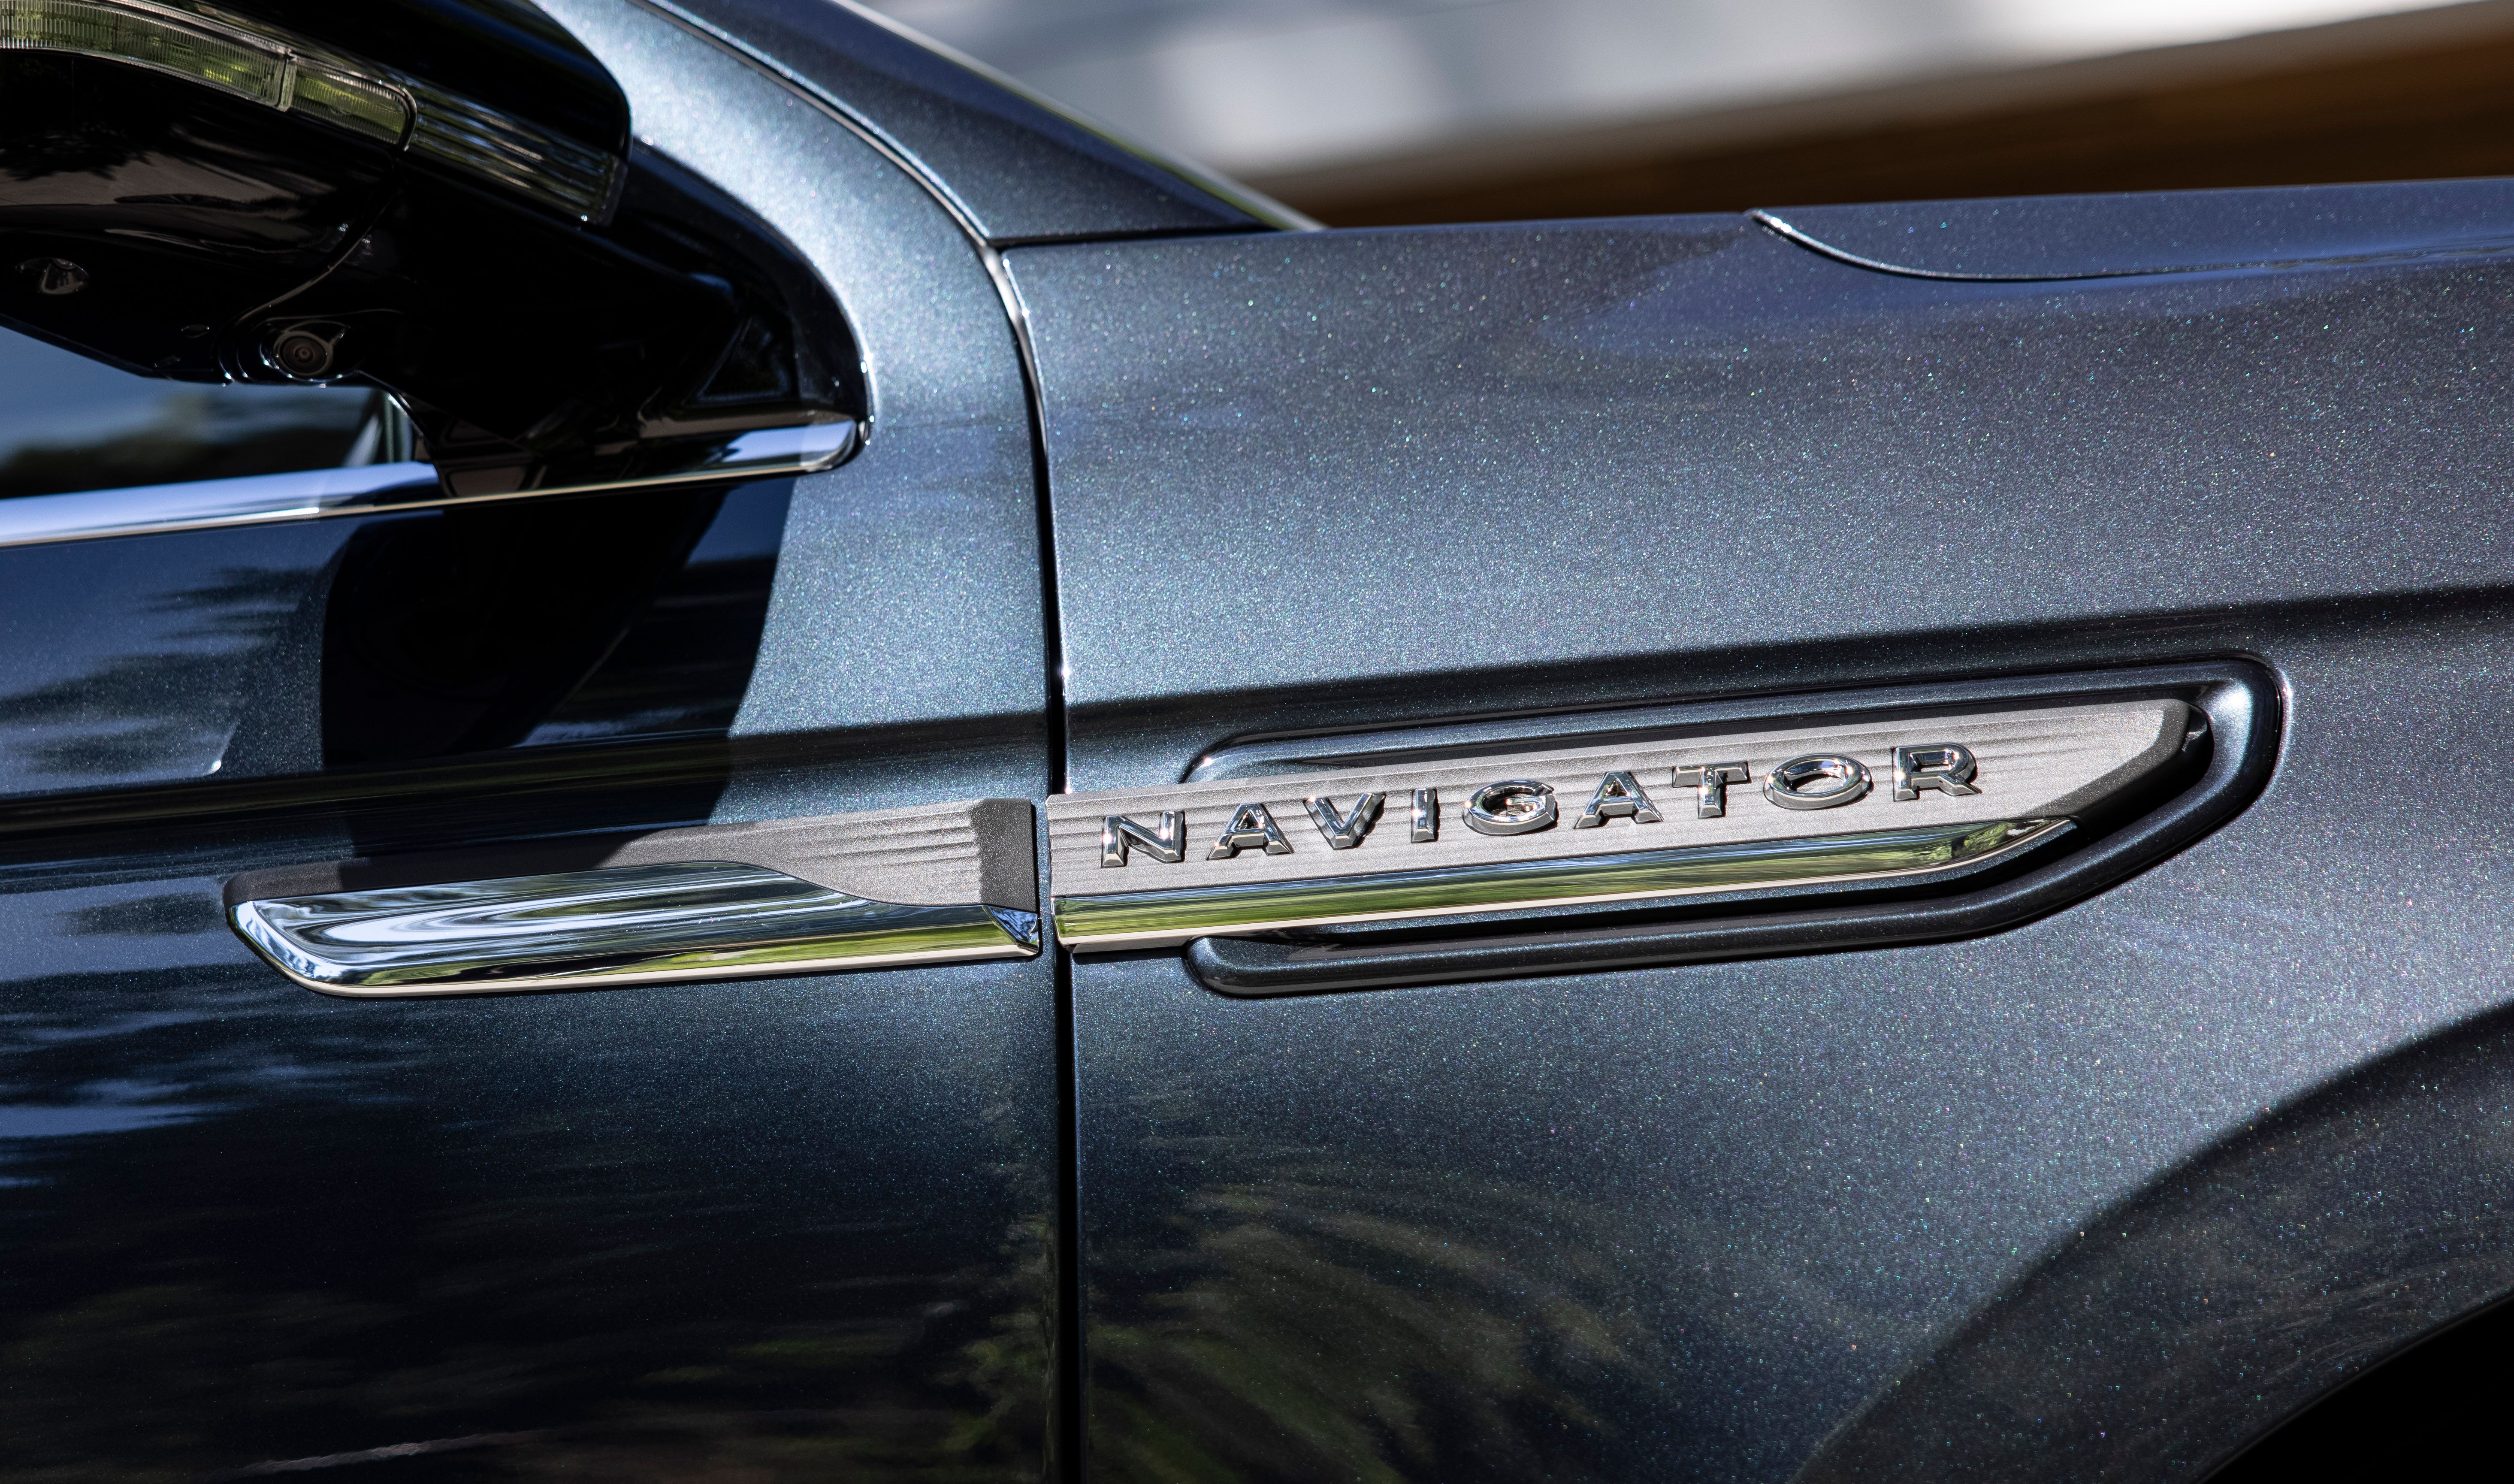 2022 Lincoln Navigator - An SUV That's Heavy On Tech Features And Luxury